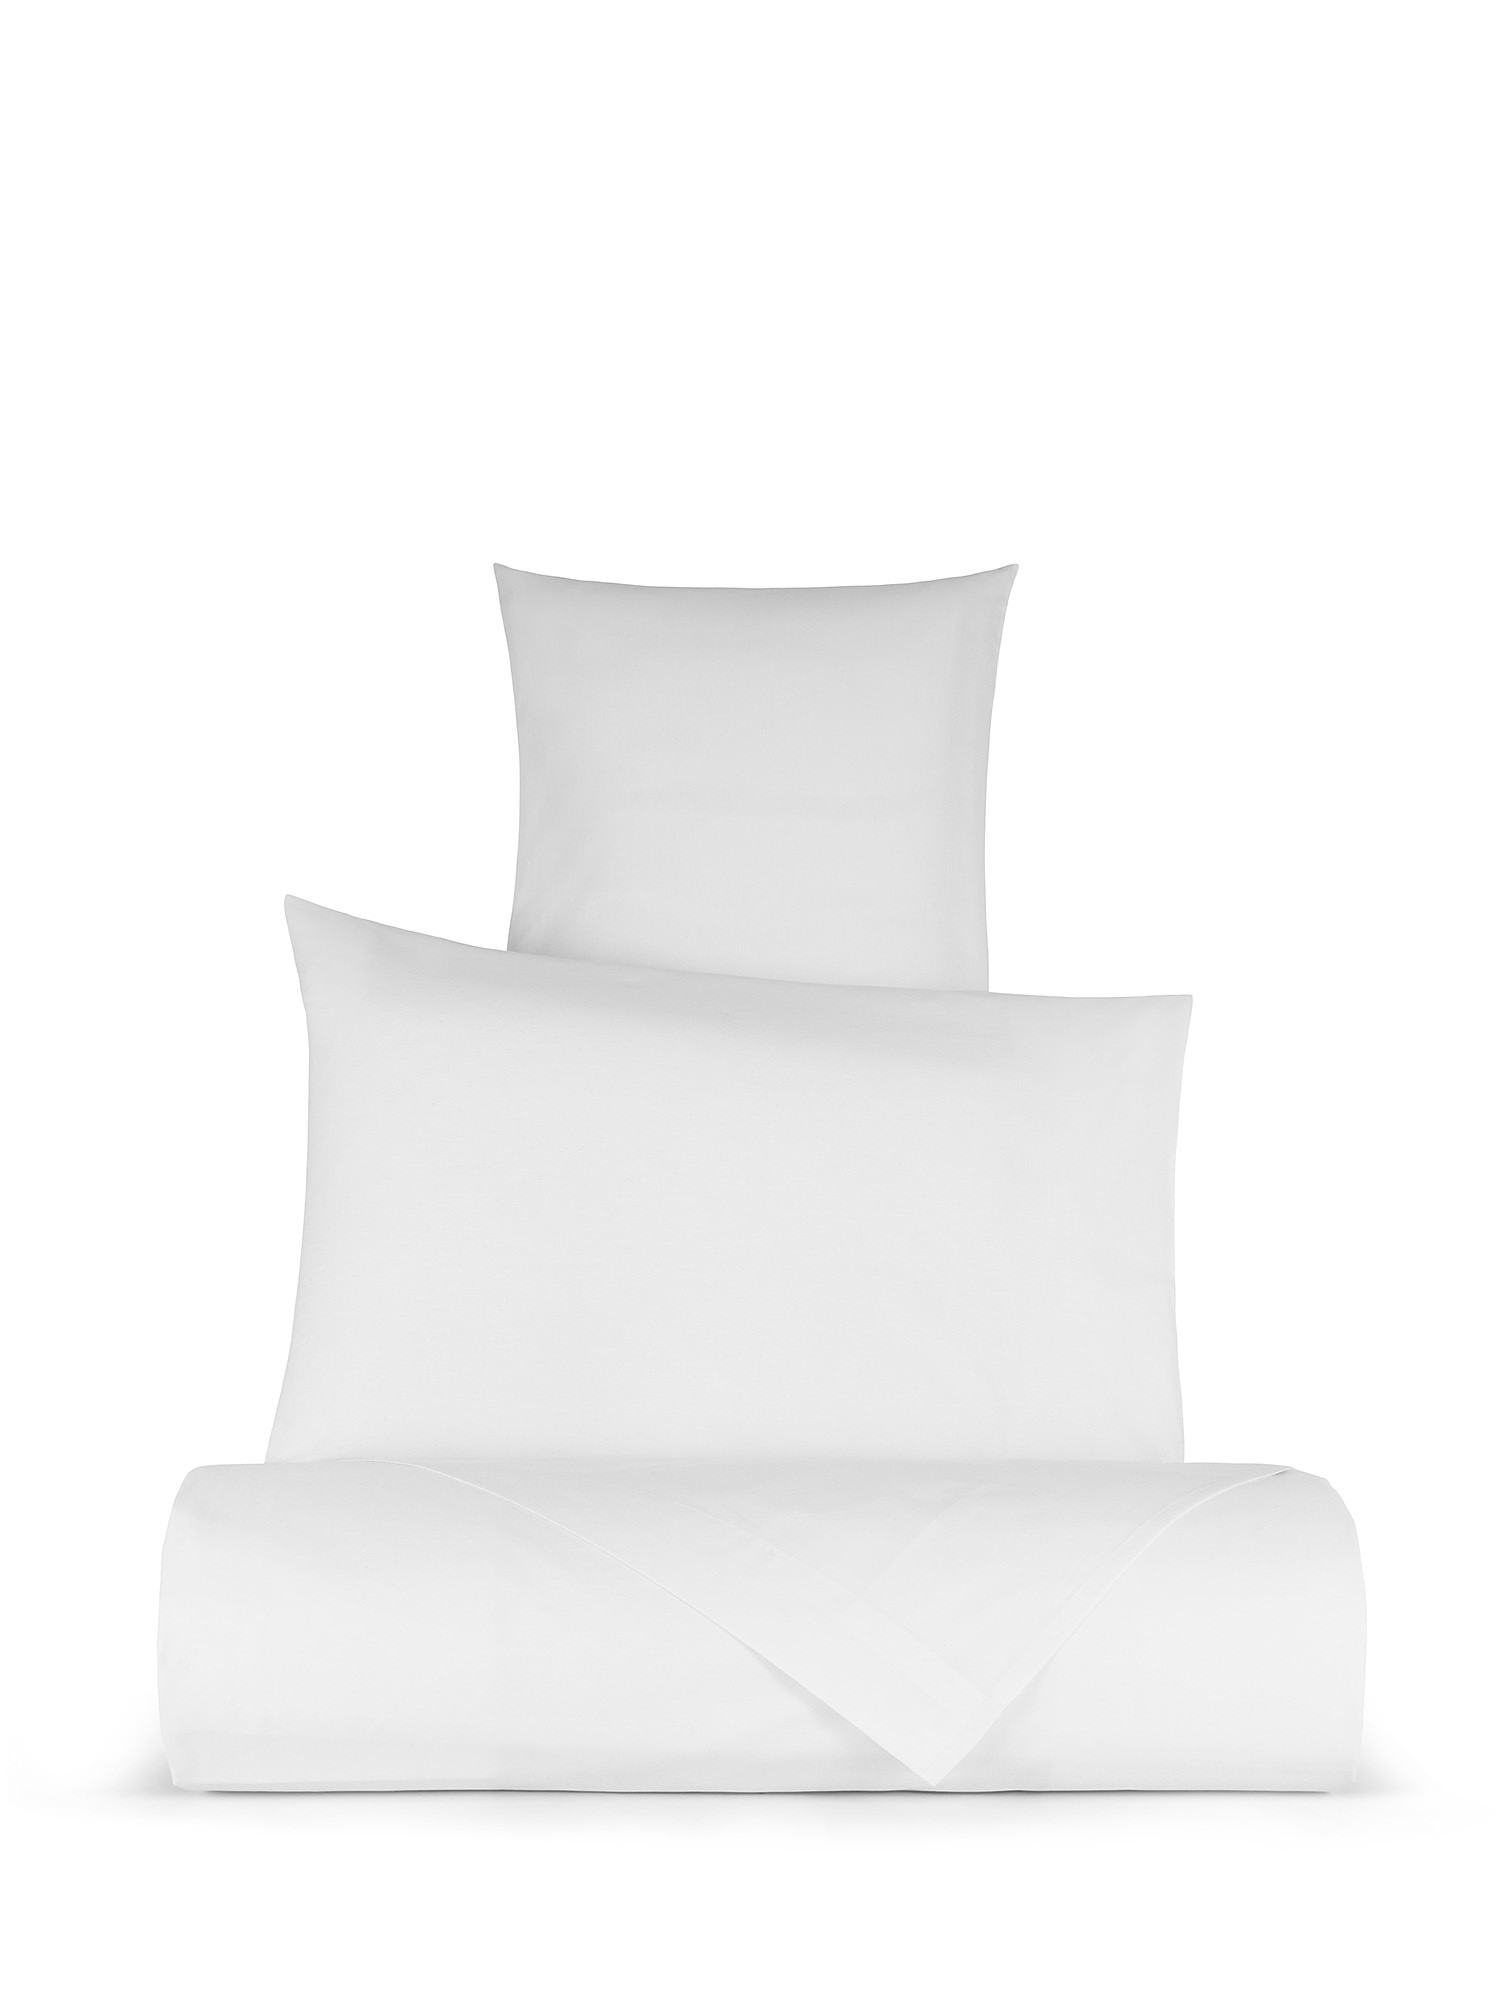 Solid color percale cotton duvet cover set, White, large image number 0